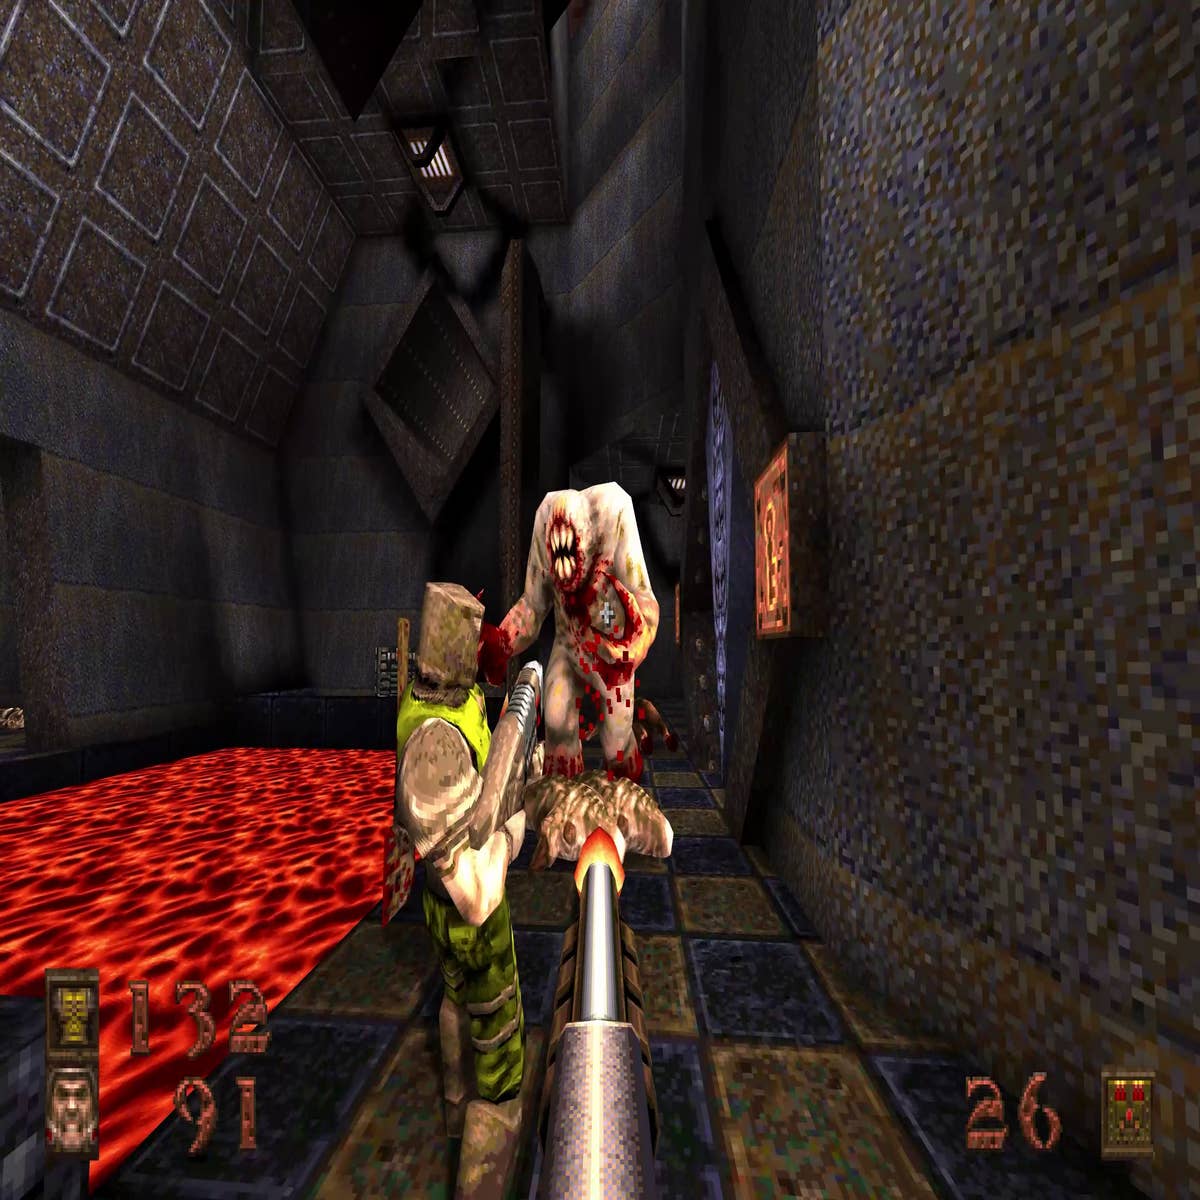 Download over 50 classic PC games for free: Quake, Ultima, Shadow